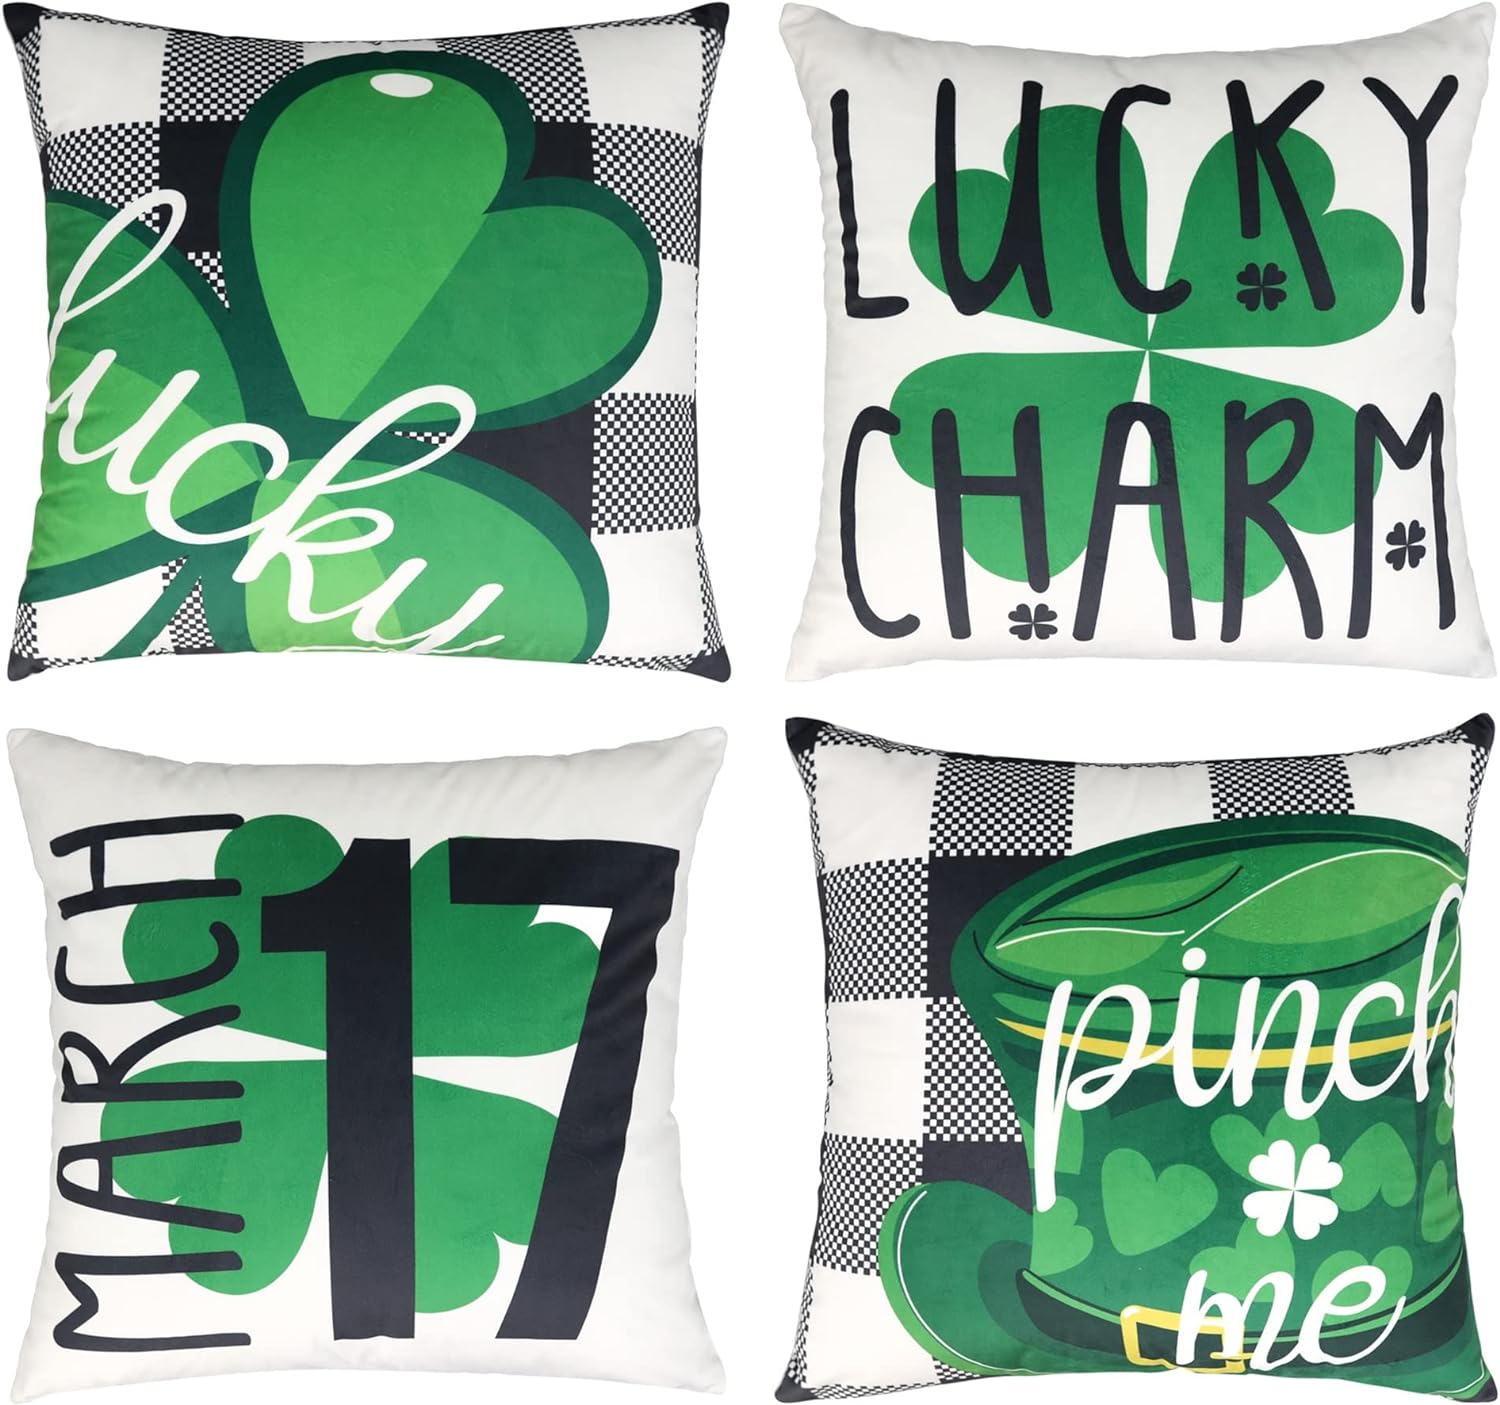 HPUK Set of 4 St Patricks Day Throw Pillow Covers, 18x18 inch Decorative Couch Pillows for Spring, Gift, Living Room, Bedroom, Sofa, Chair